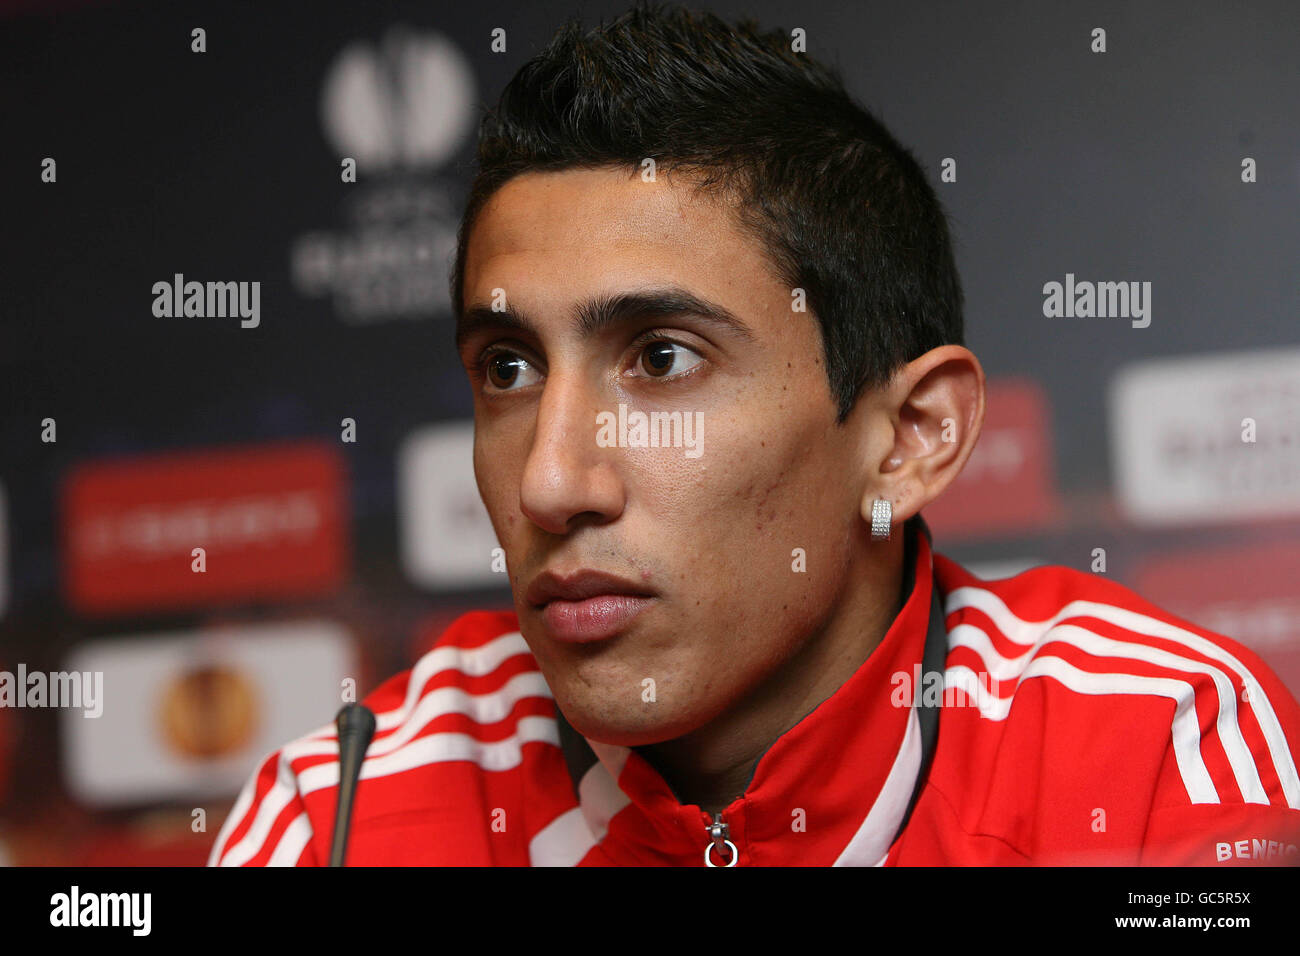 Soccer - UEFA Europa League - Group I - Everton v SL Benfica - SL Benfica Press Conference - Goodison Park. Benfica's Angel Di Maria during the press conference Stock Photo